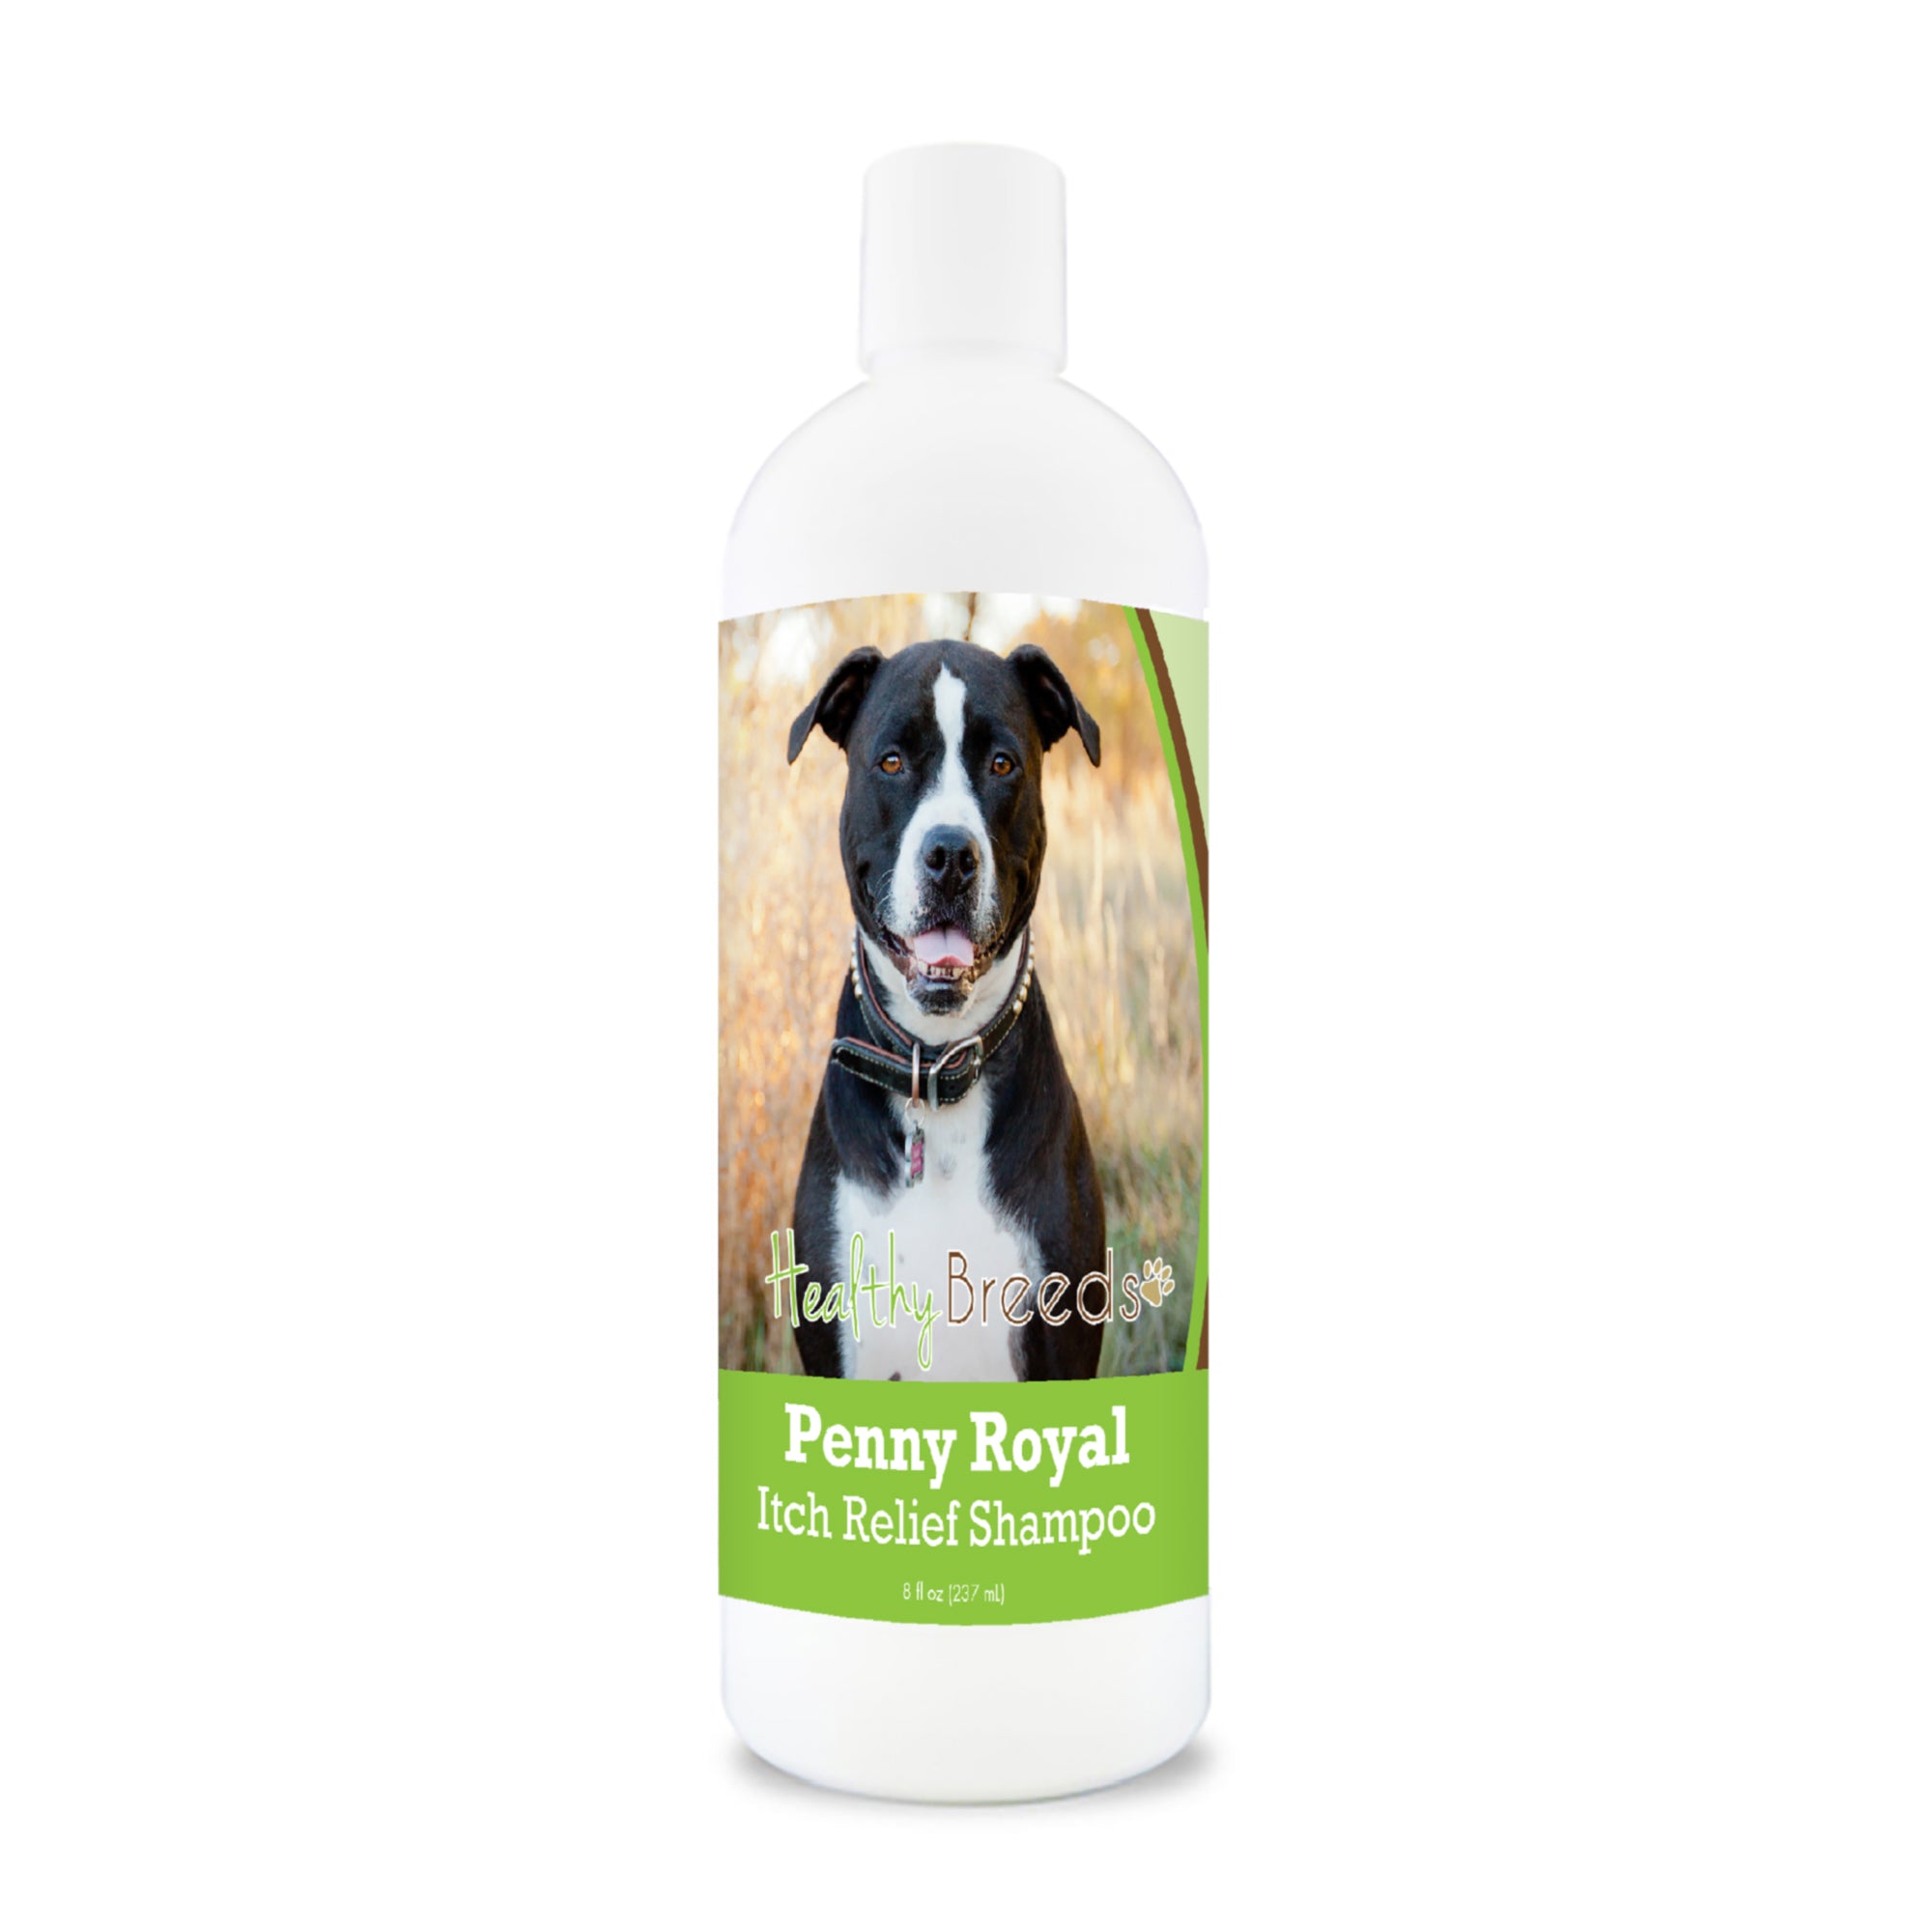 Pit Bull Penny Royal Itch Relief Shampoo 8 oz